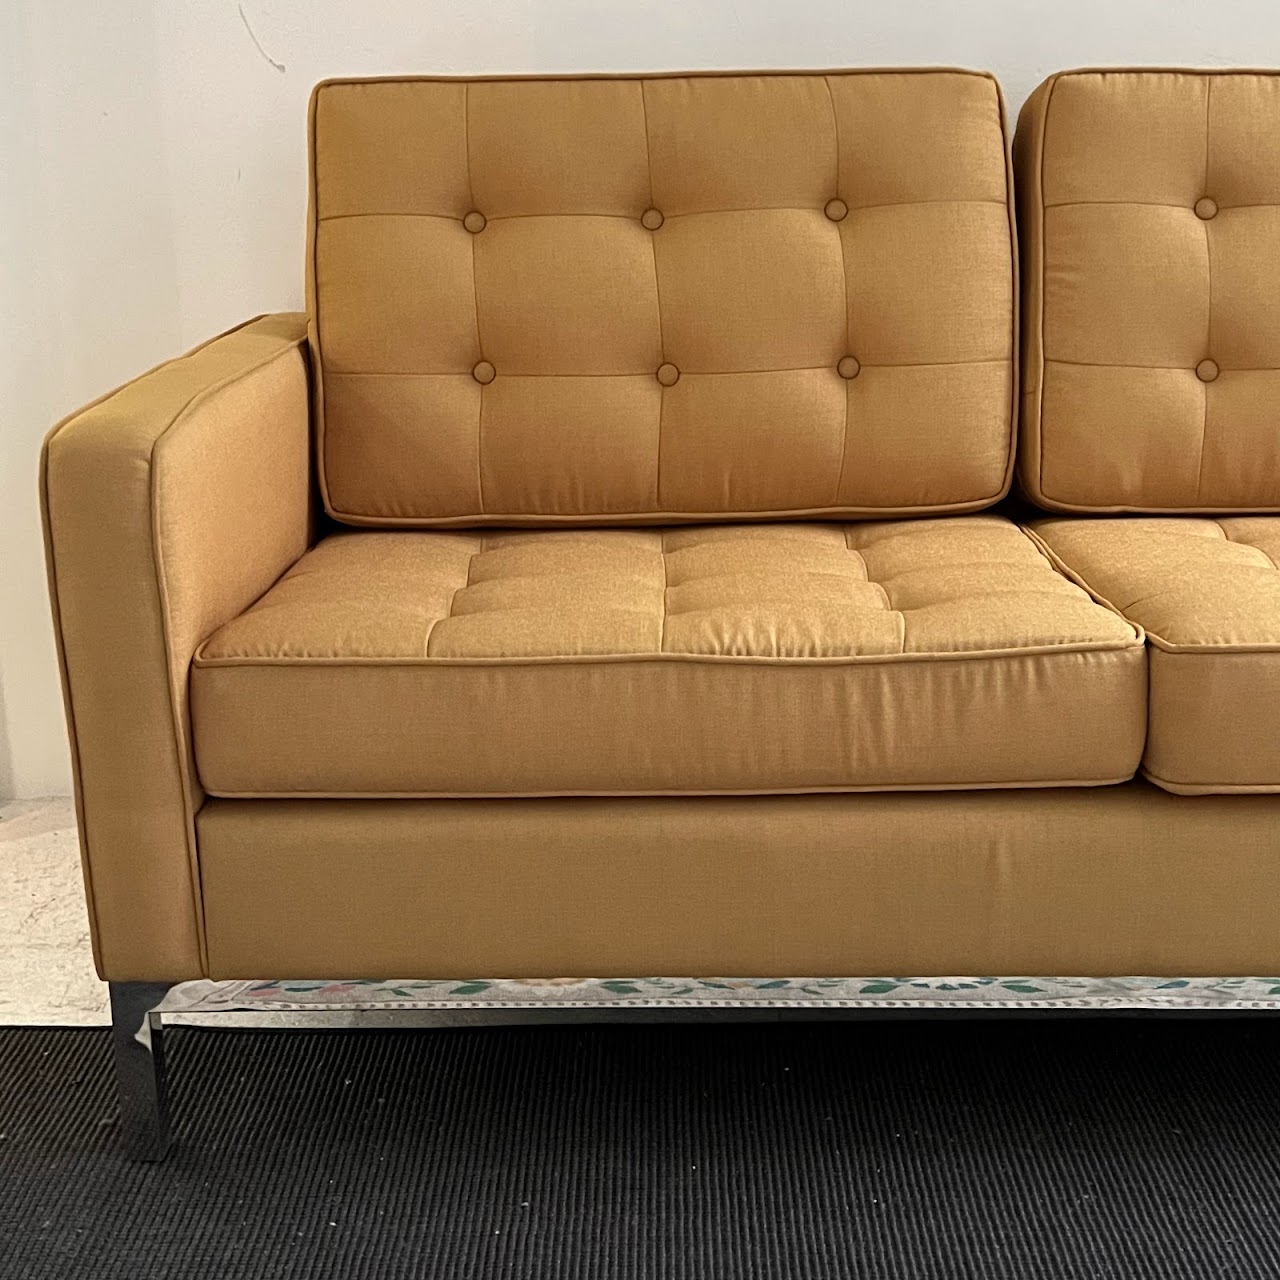 Tufted Contemporary Loveseat #1